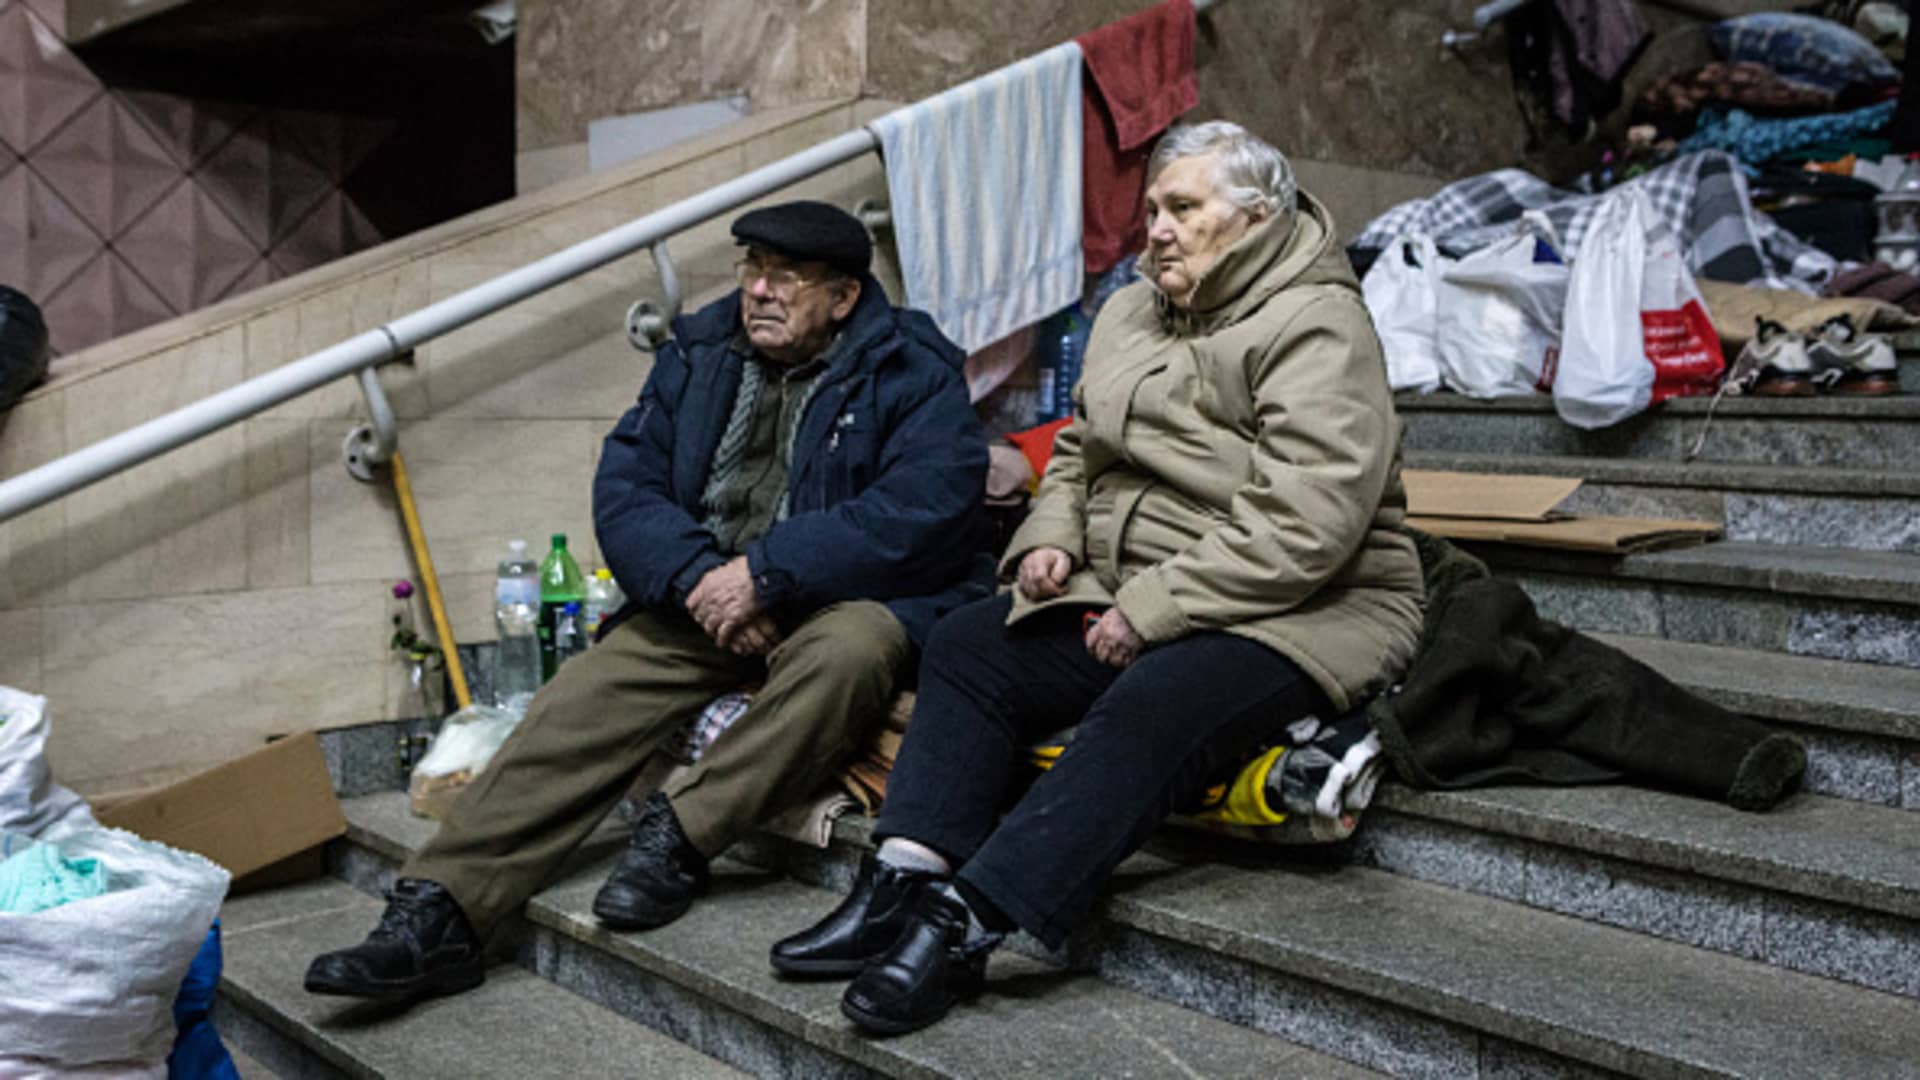 A view of people taking refuge at the Kharkiv Metro Station in Kharkiv, Ukraine as Russian attacks continue.